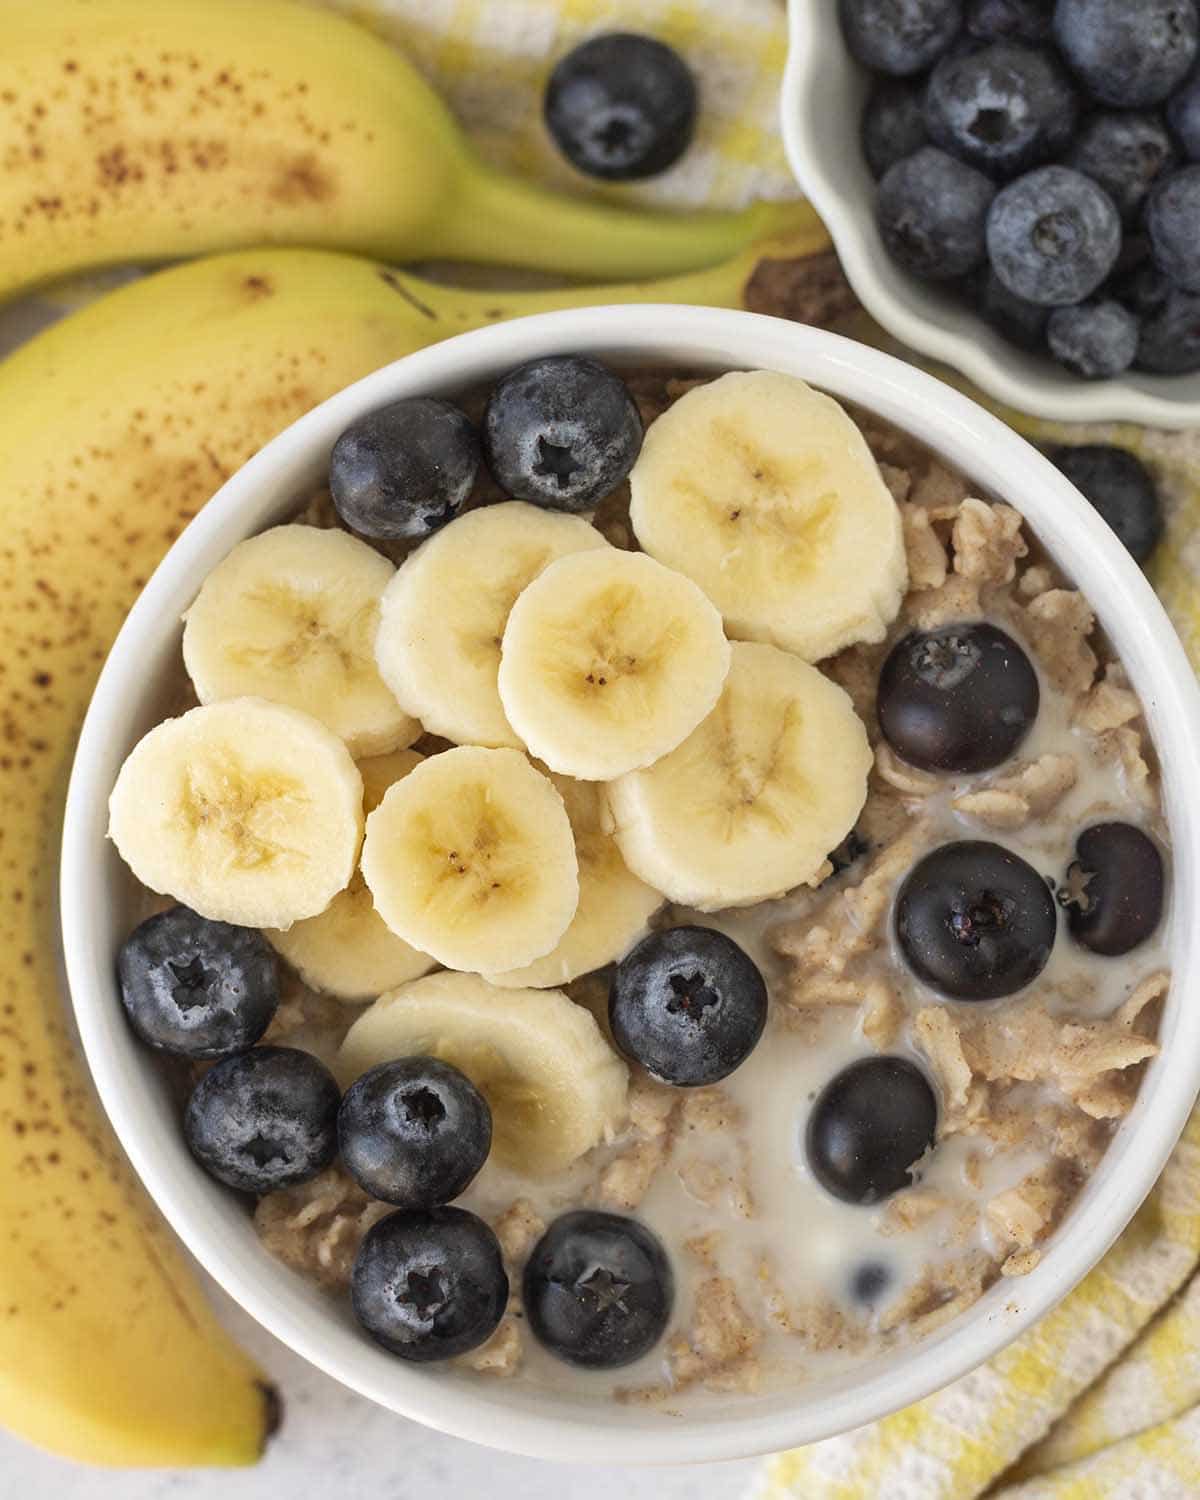 An overhead shot showing a bowl of blueberry banana oatmeal, fresh blueberries and sliced bananas garnish the oatmeal.